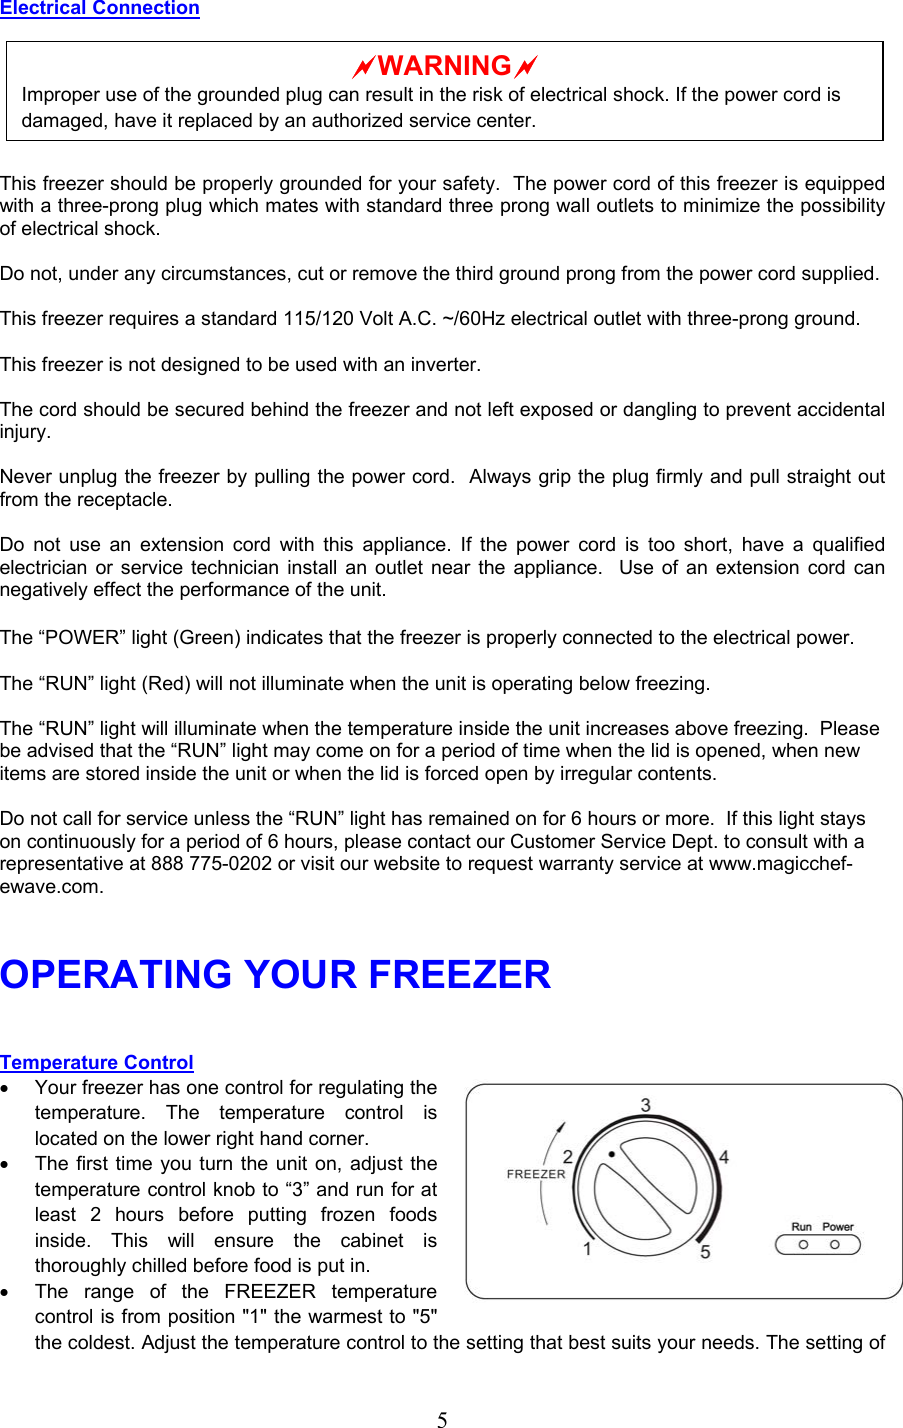 Page 6 of 11 - Magic-Chef Magic-Chef-Mccf7Wbx-Owners-Manual - Manual For Chest Freezer _English_ 4.30.08 _confirmed_